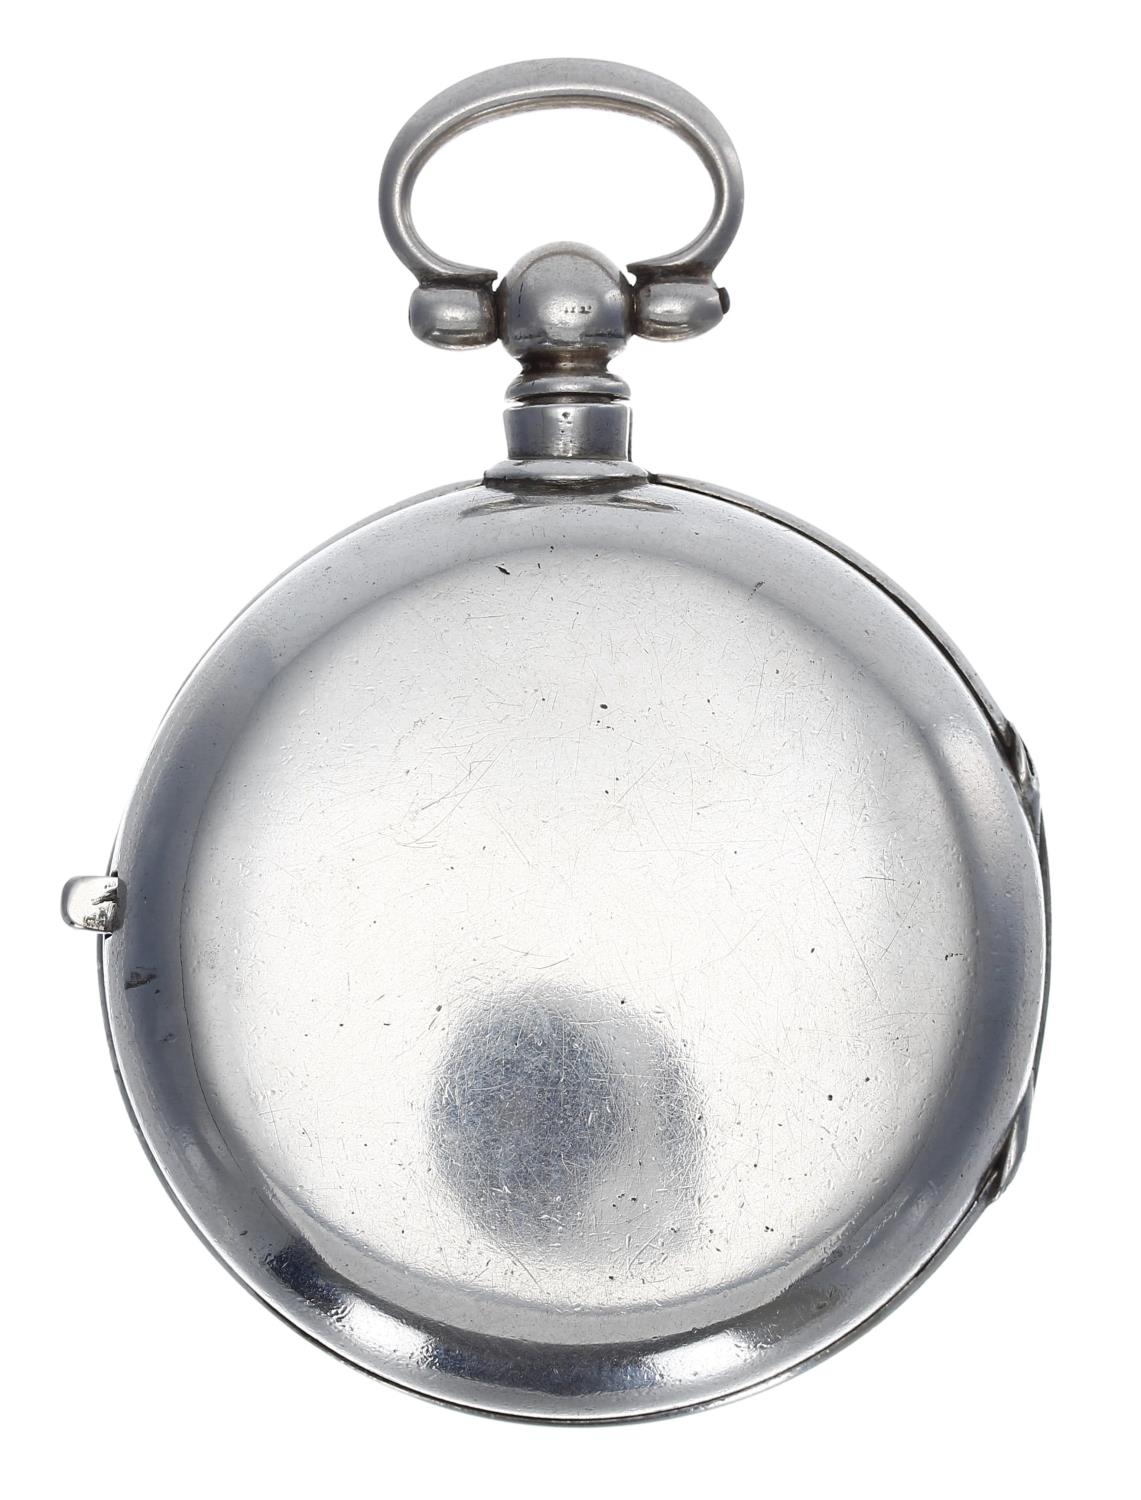 R&G Beesley, Liverpool - Victorian silver fusee lever pocket watch, Birmingham 1894, signed - Image 4 of 6